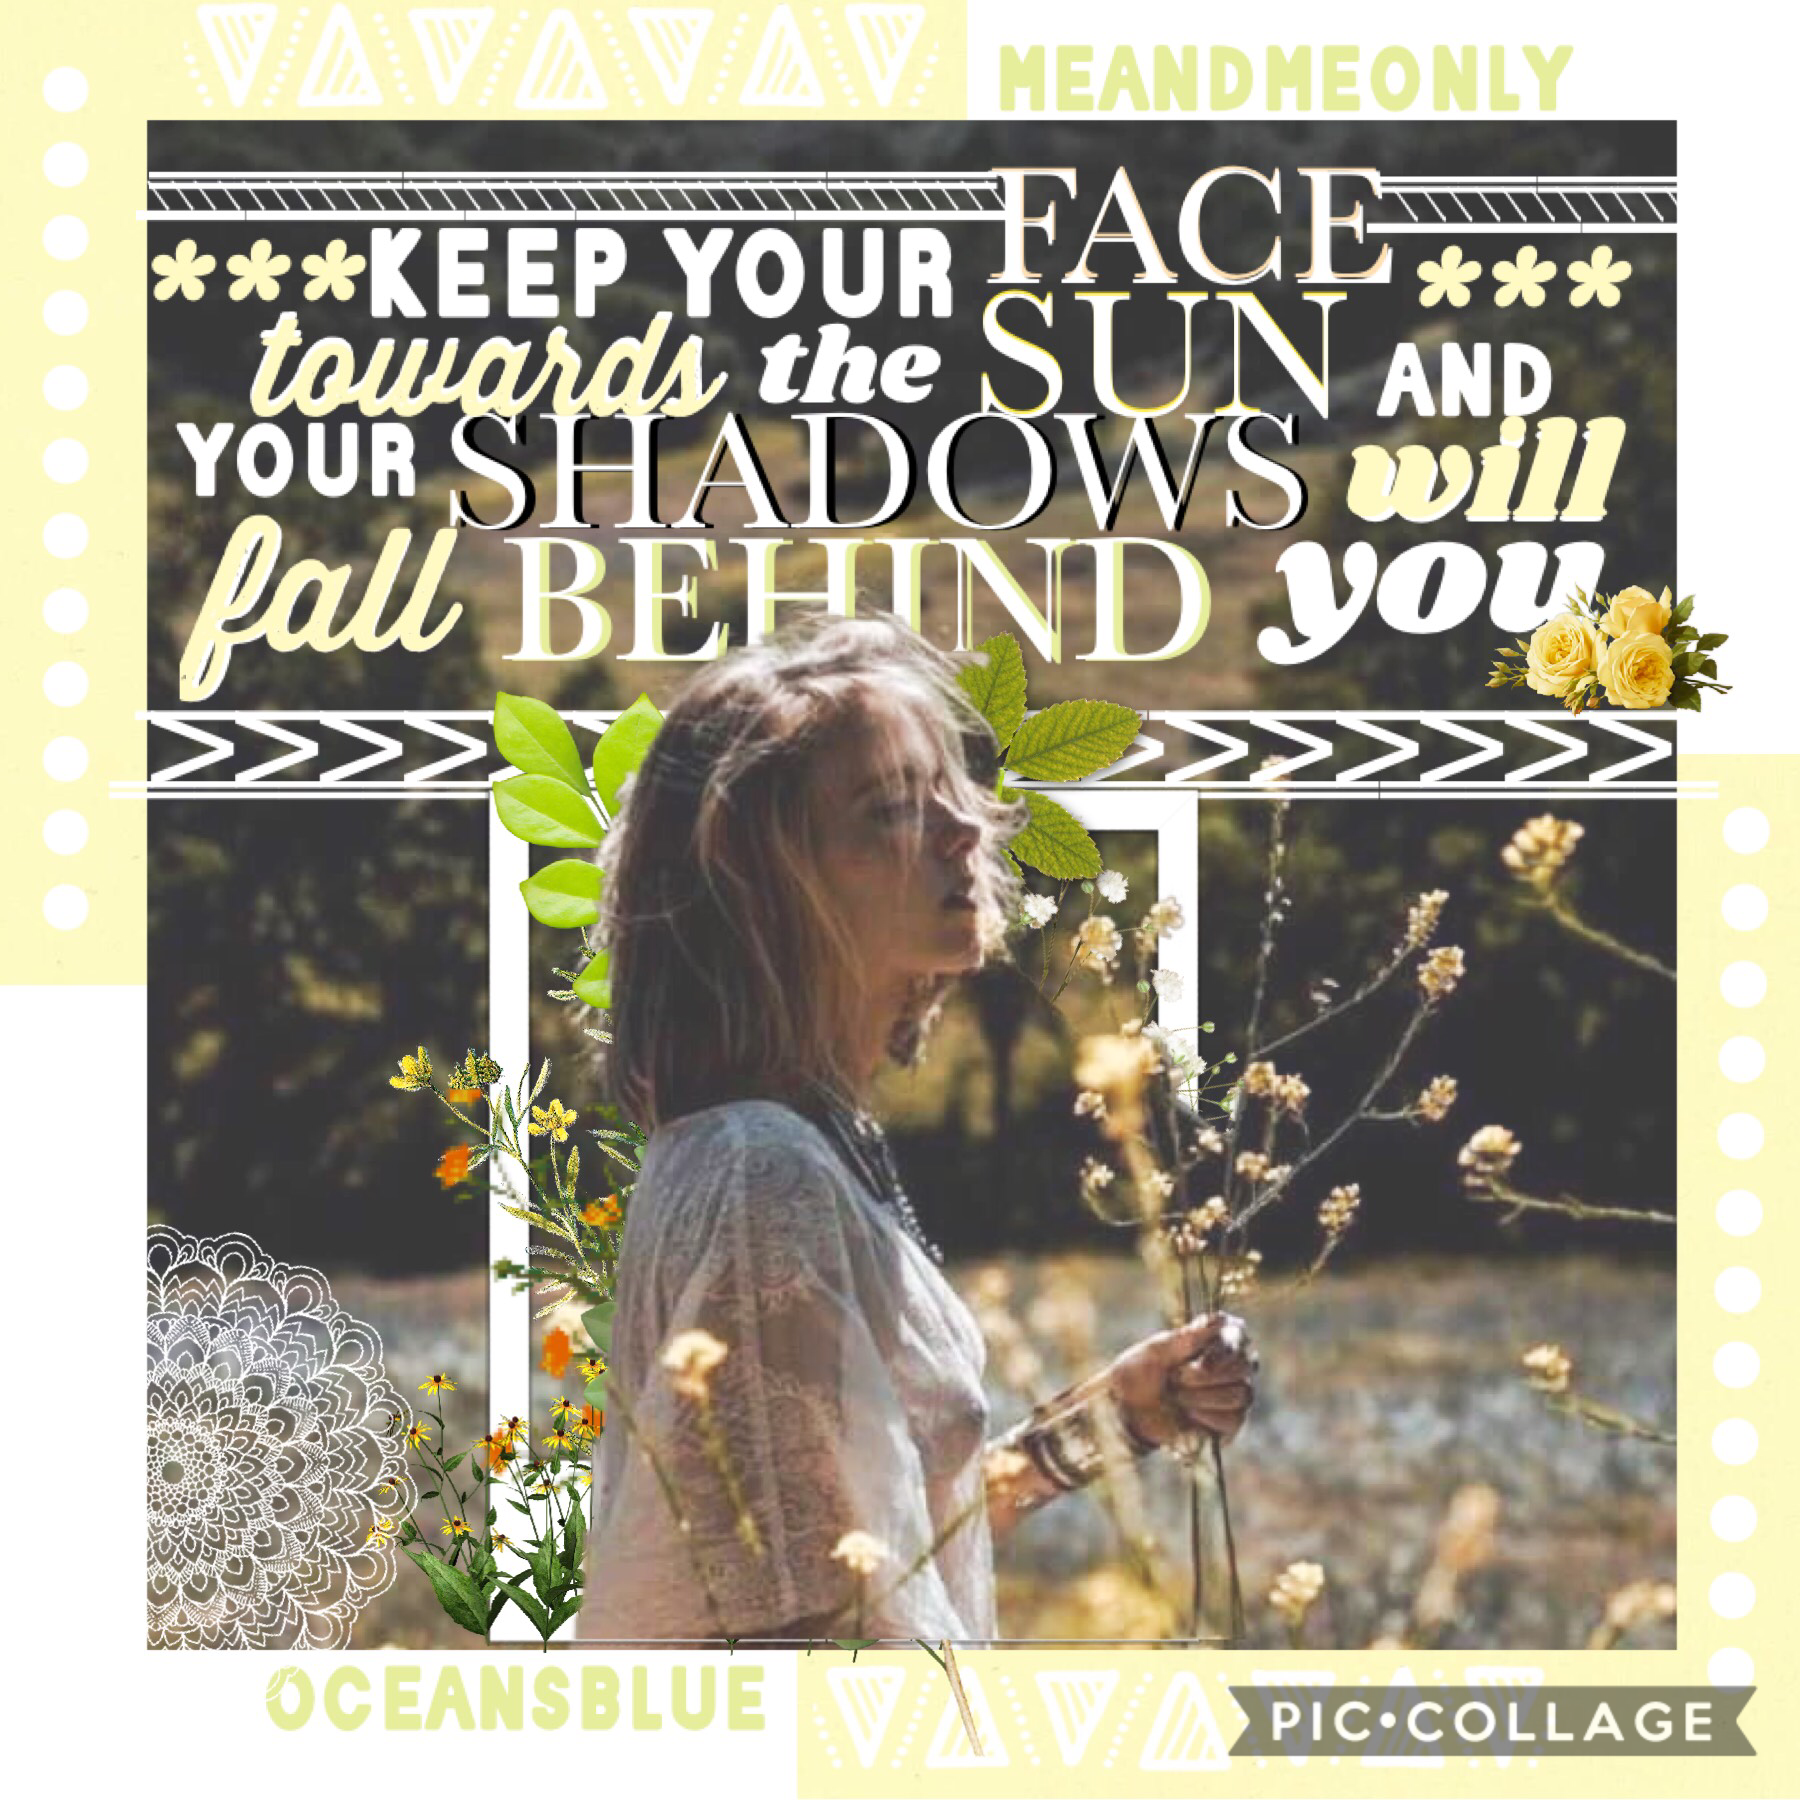 collab with the amazing OceansBlue! everyone go follow her!! she’s super talented✨💛 she choose the quote and background and i put it all together💓 QOTD: fav sport?
AOTD: basketball 🏀 